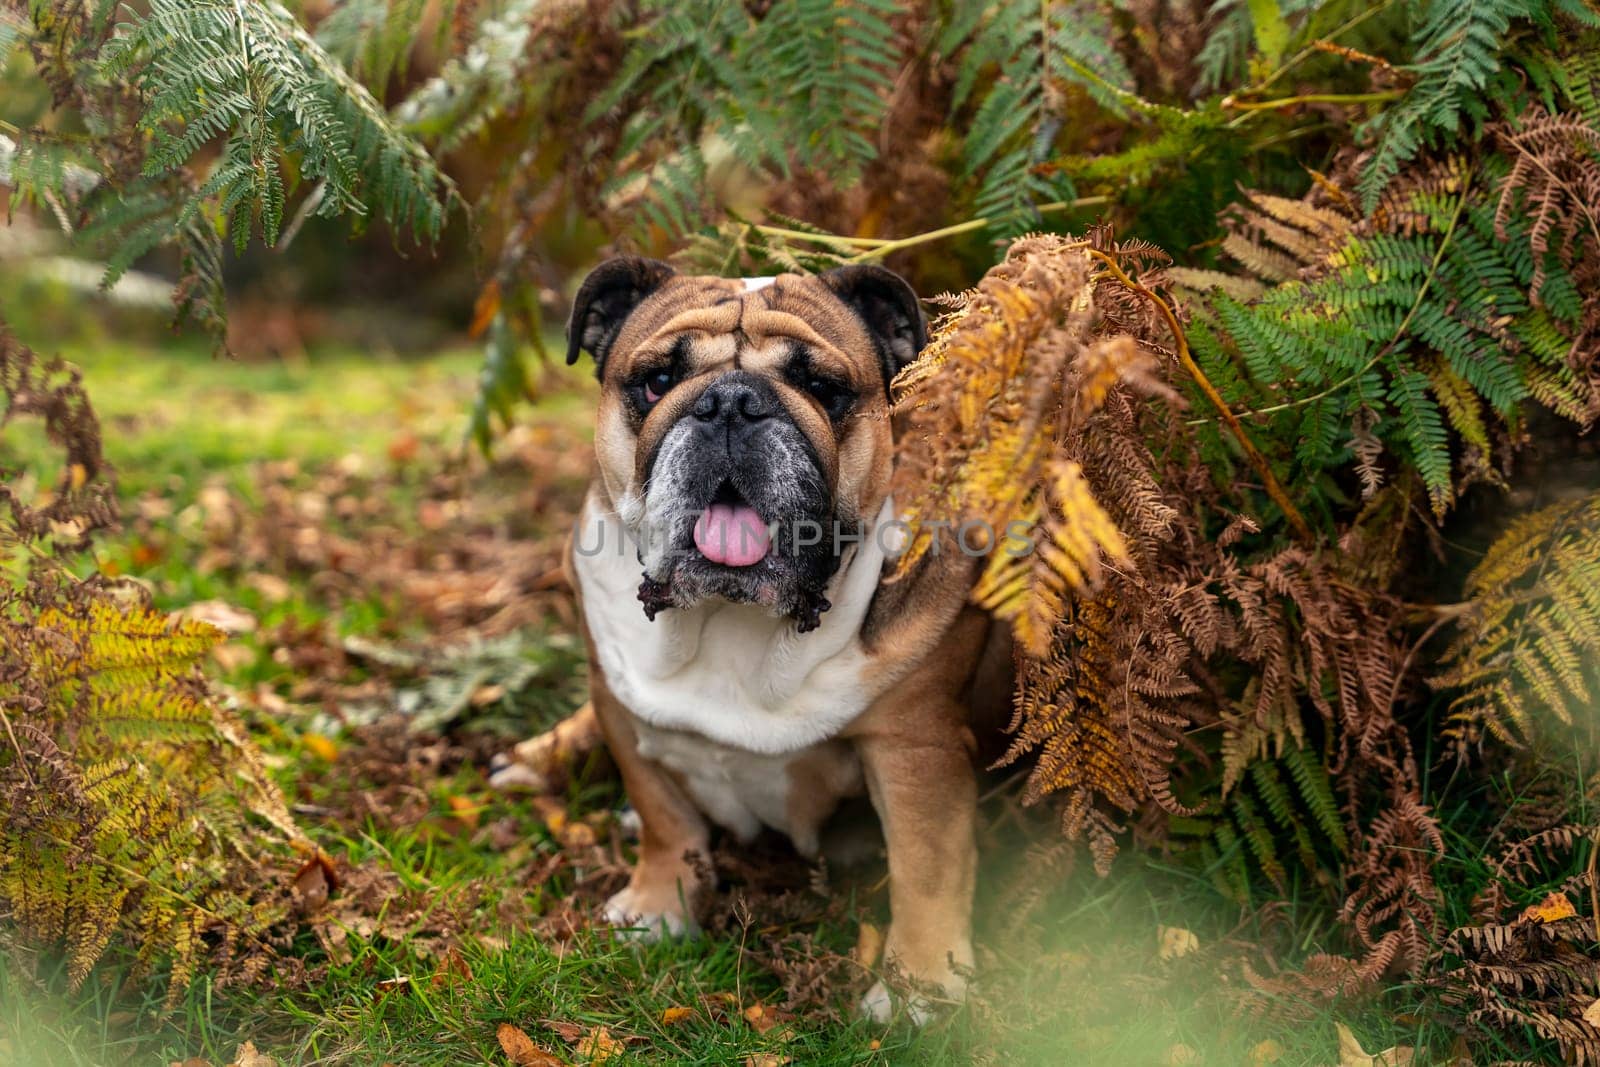 Red English British Bulldog Dog out for a walk looking up sitting in the grass on Autumn sunny day at sunset by Iryna_Melnyk